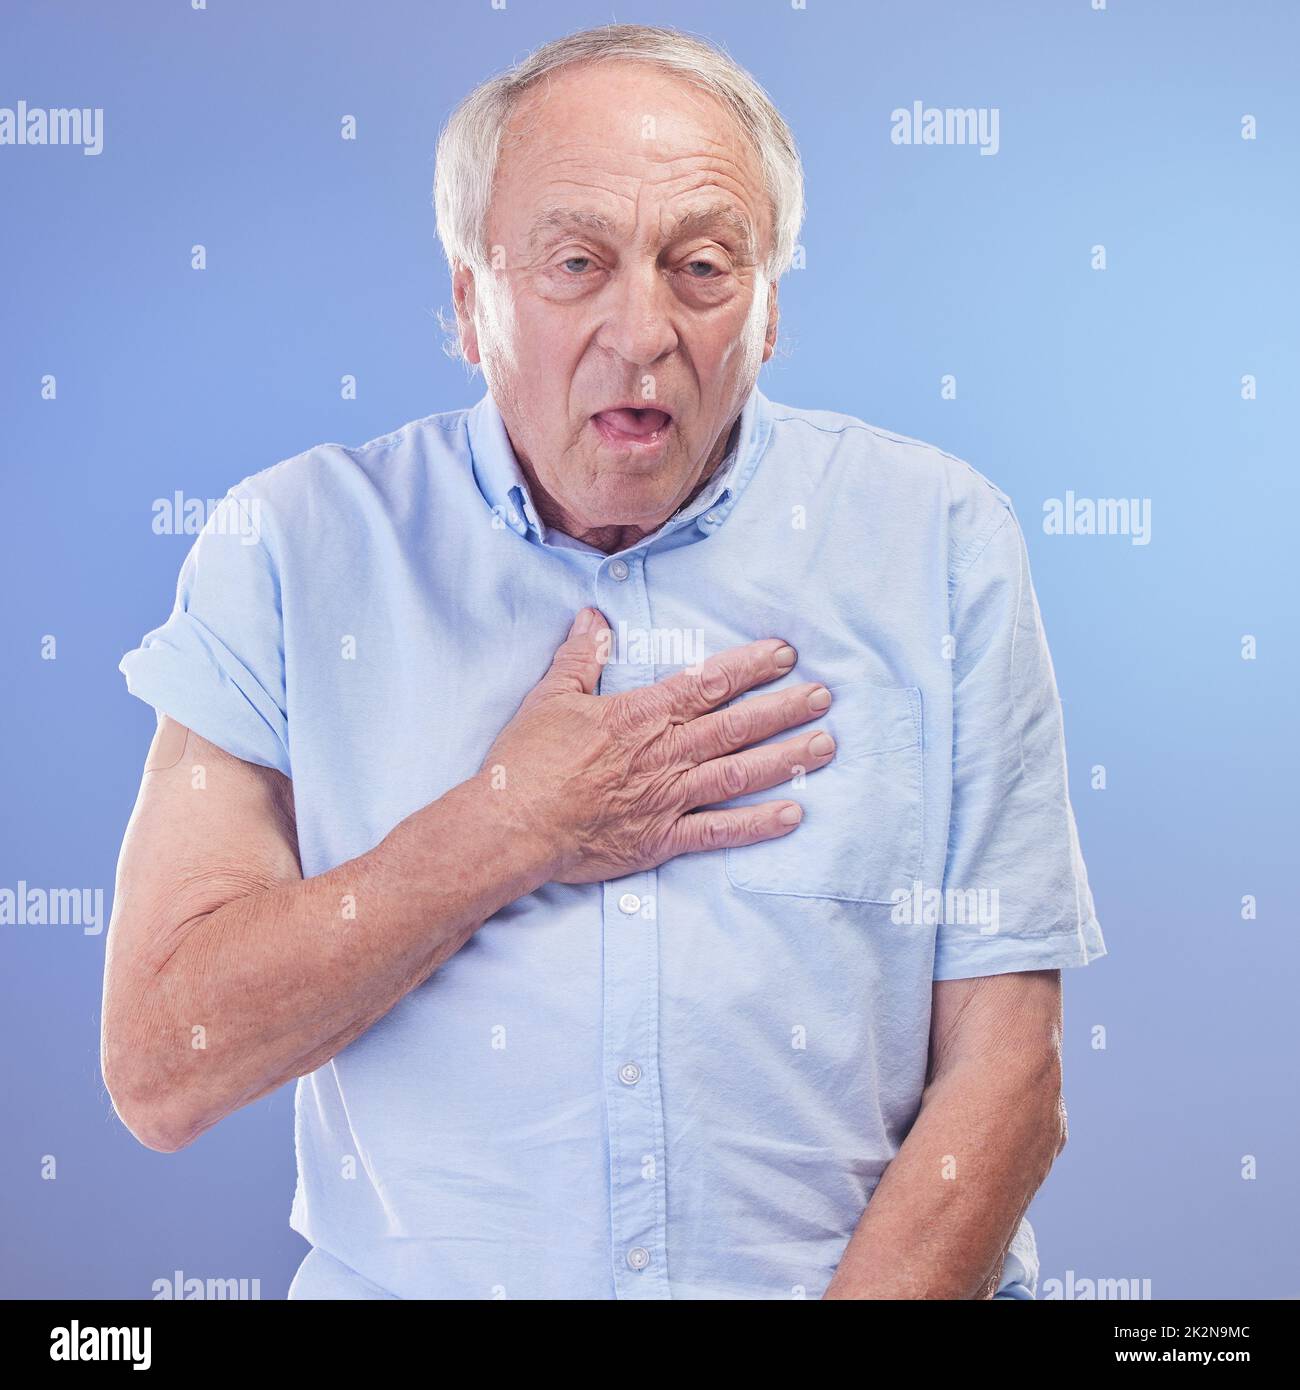 Shortness of breath could shorten your life, get it checked. Studio shot of a senior man experiencing chest discomfort against a blue background. Stock Photo